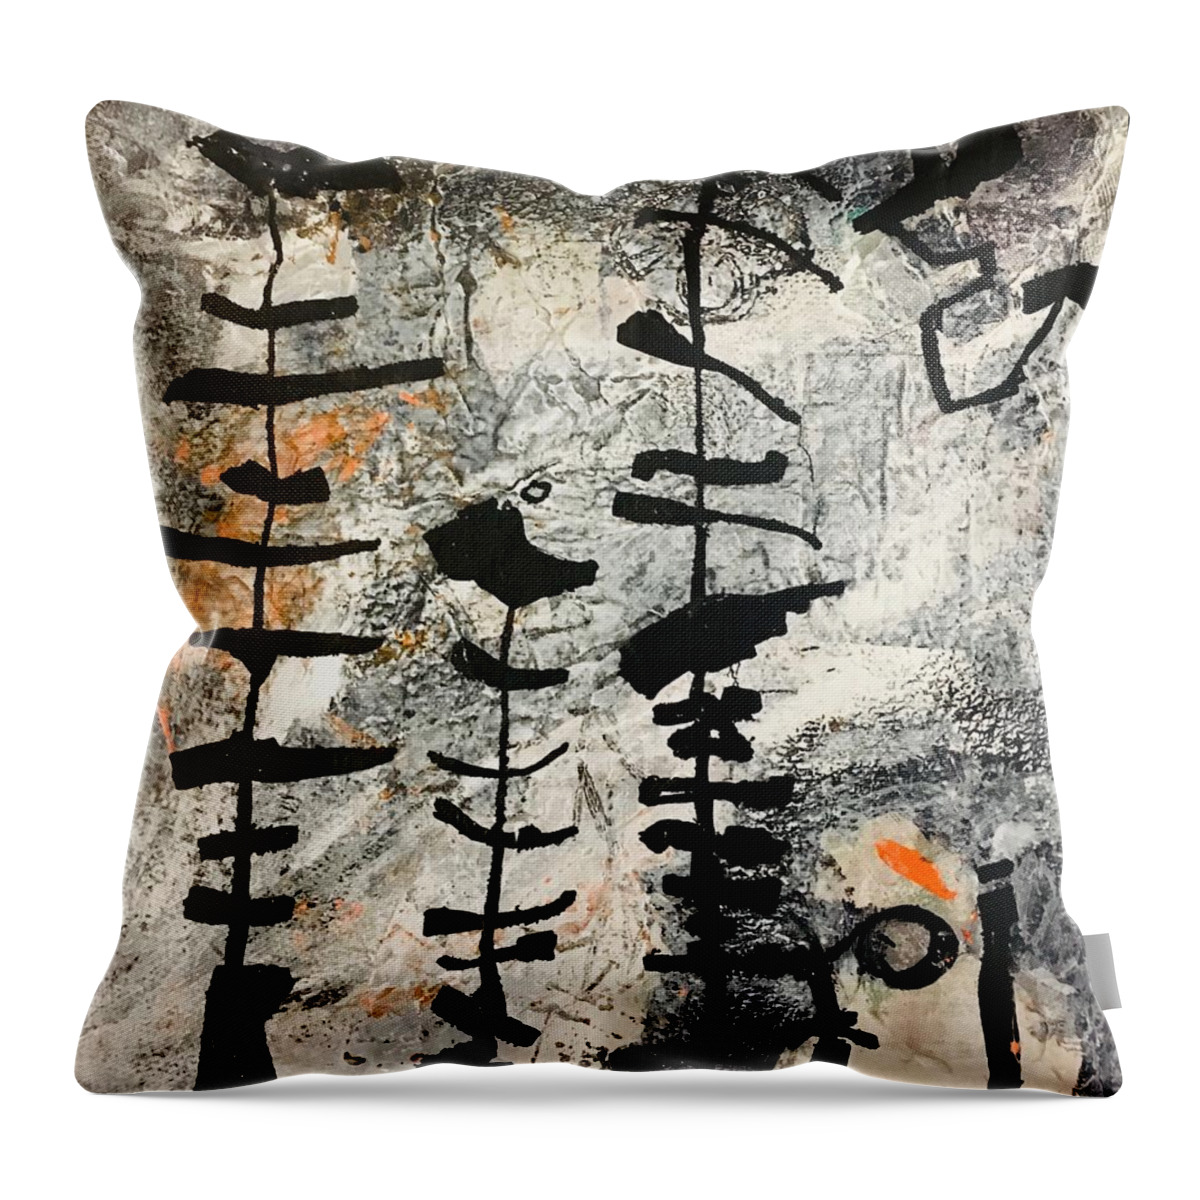 Black And White Throw Pillow featuring the painting Burnt Offerings by Carole Johnson